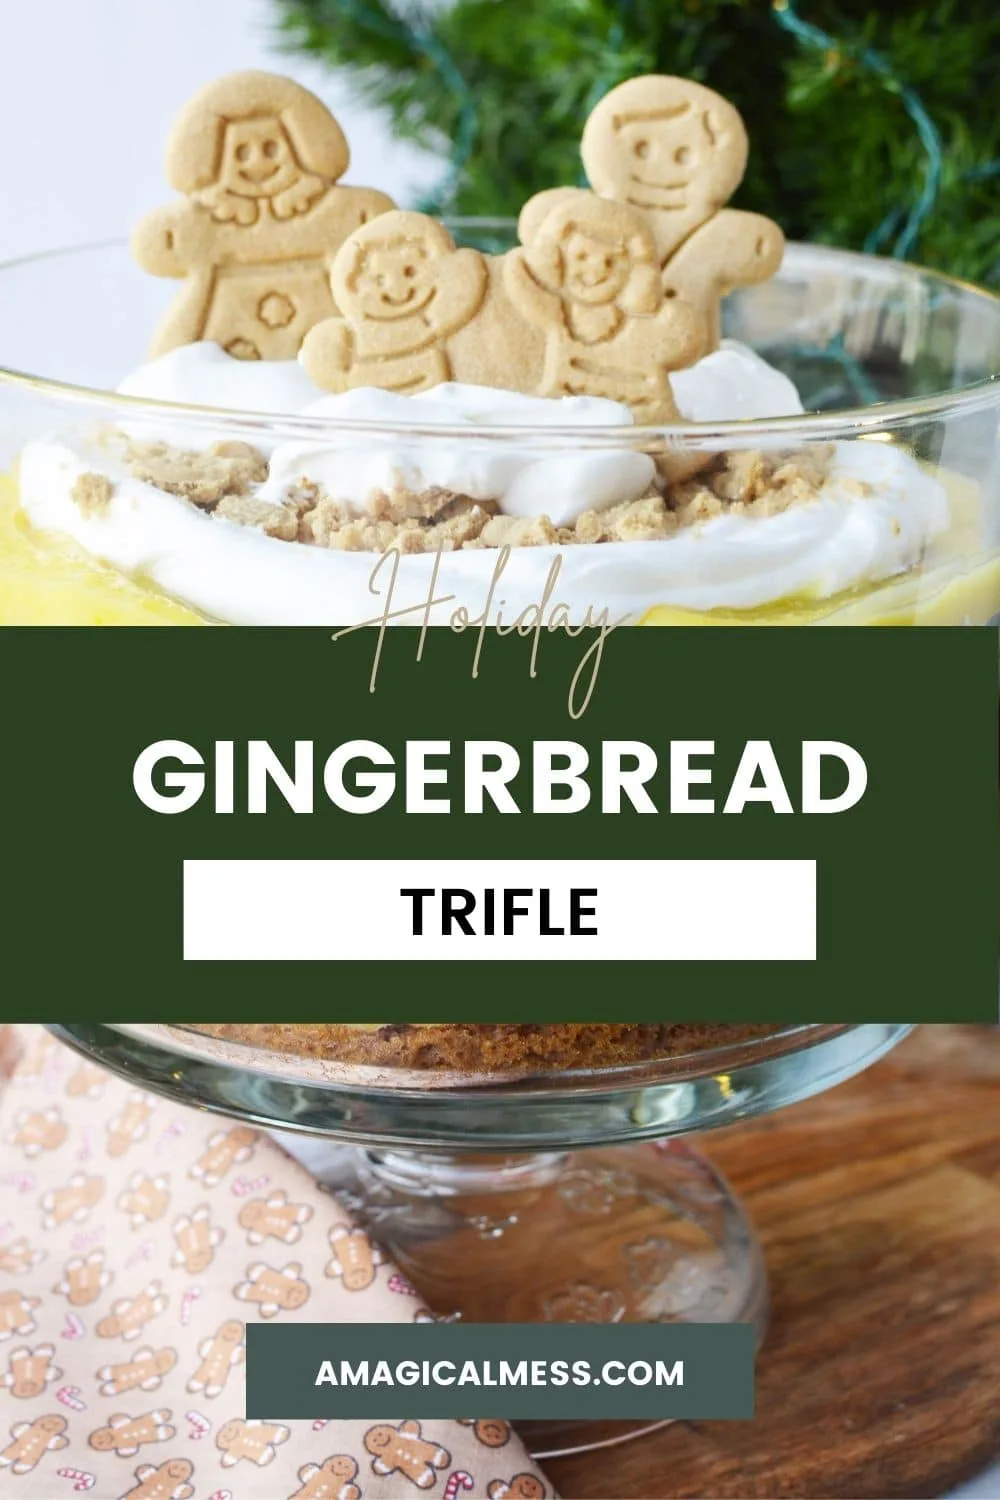 Gingerbread family cookies on a pudding trifle